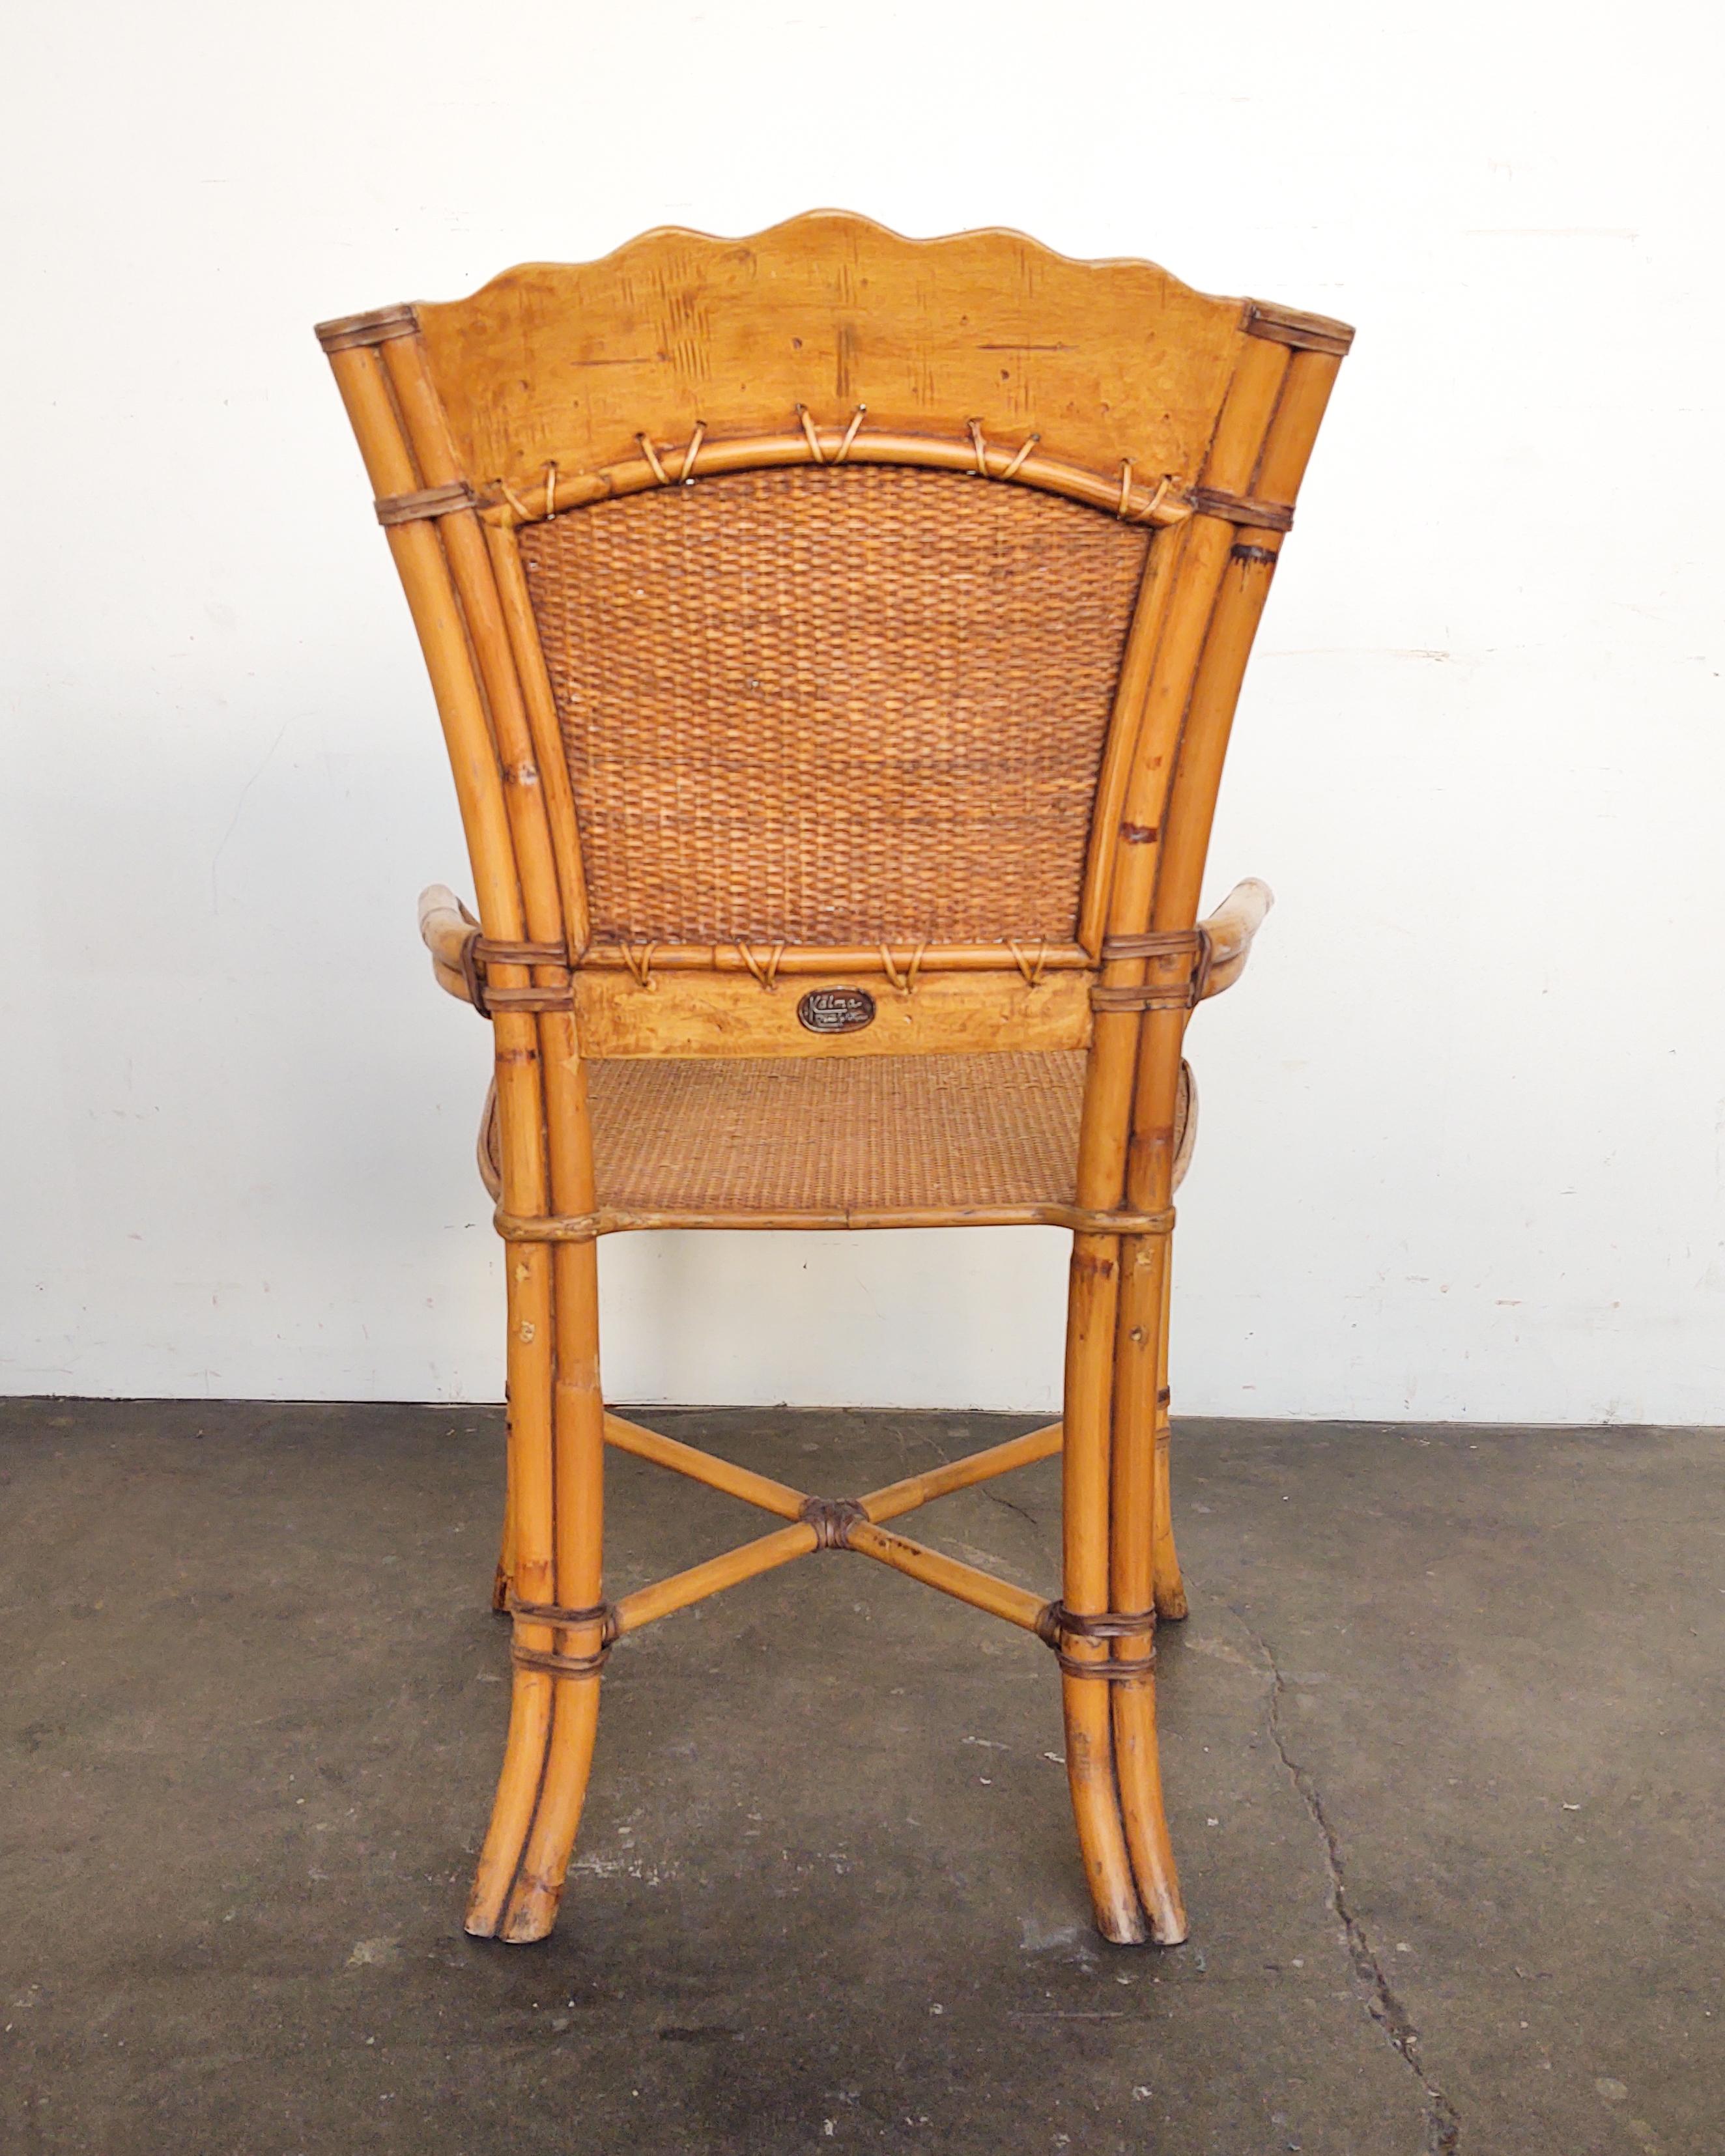 Sculptural Rattan Arm Chair Designed by Ramon Castellano for Kalma Furniture In Good Condition For Sale In Hawthorne, CA